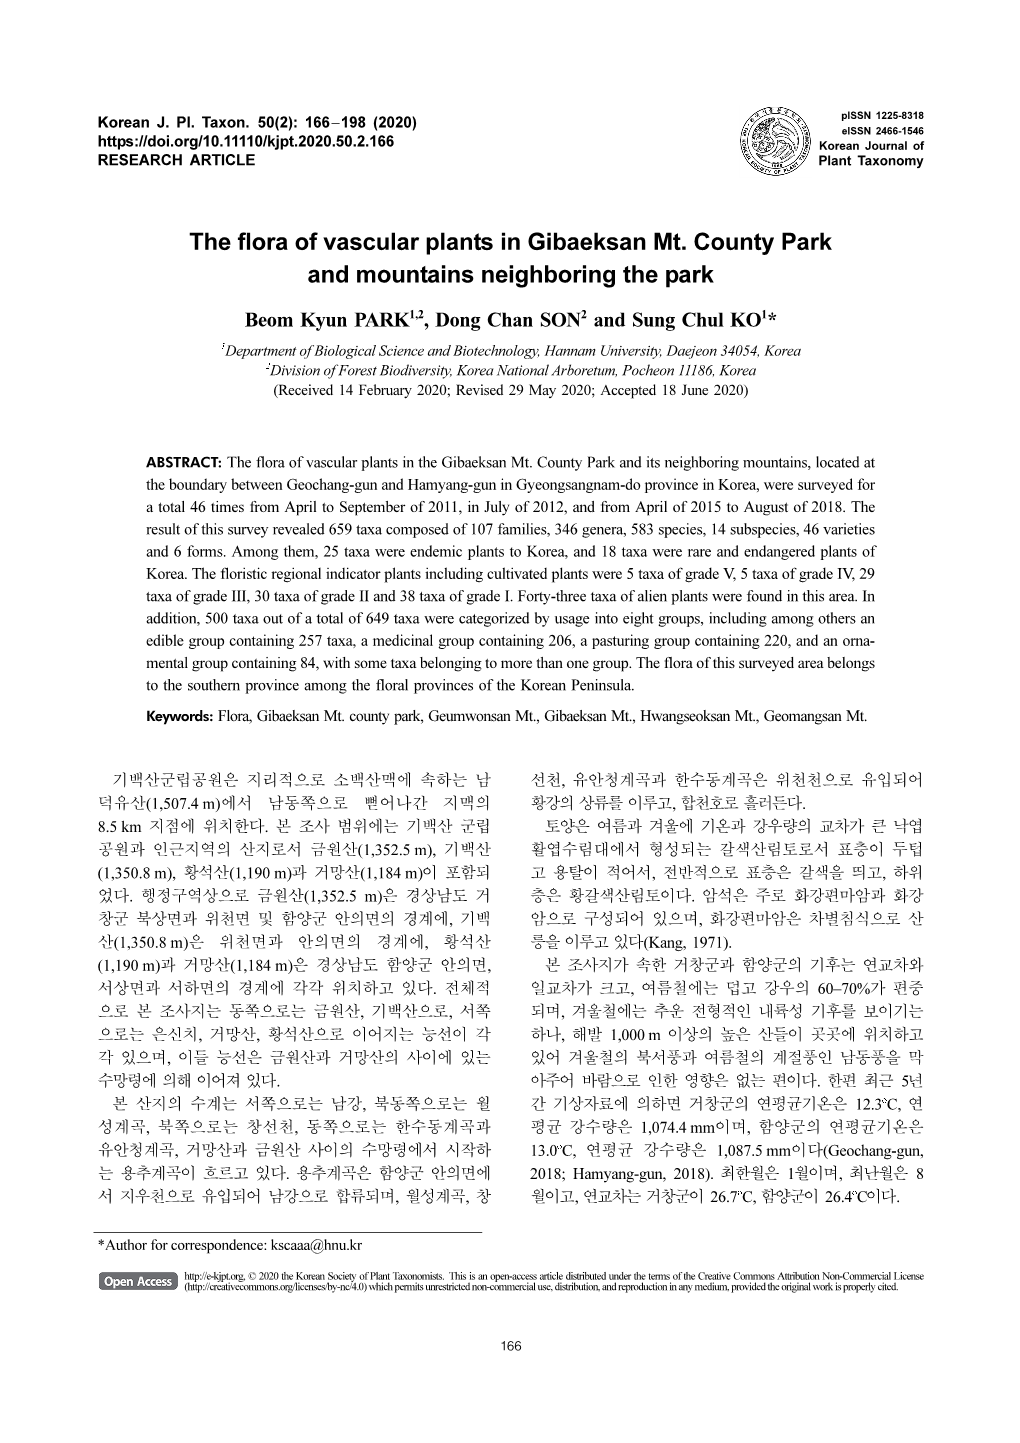 The Flora of Vascular Plants in Gibaeksan Mt. County Park and Mountains Neighboring the Park